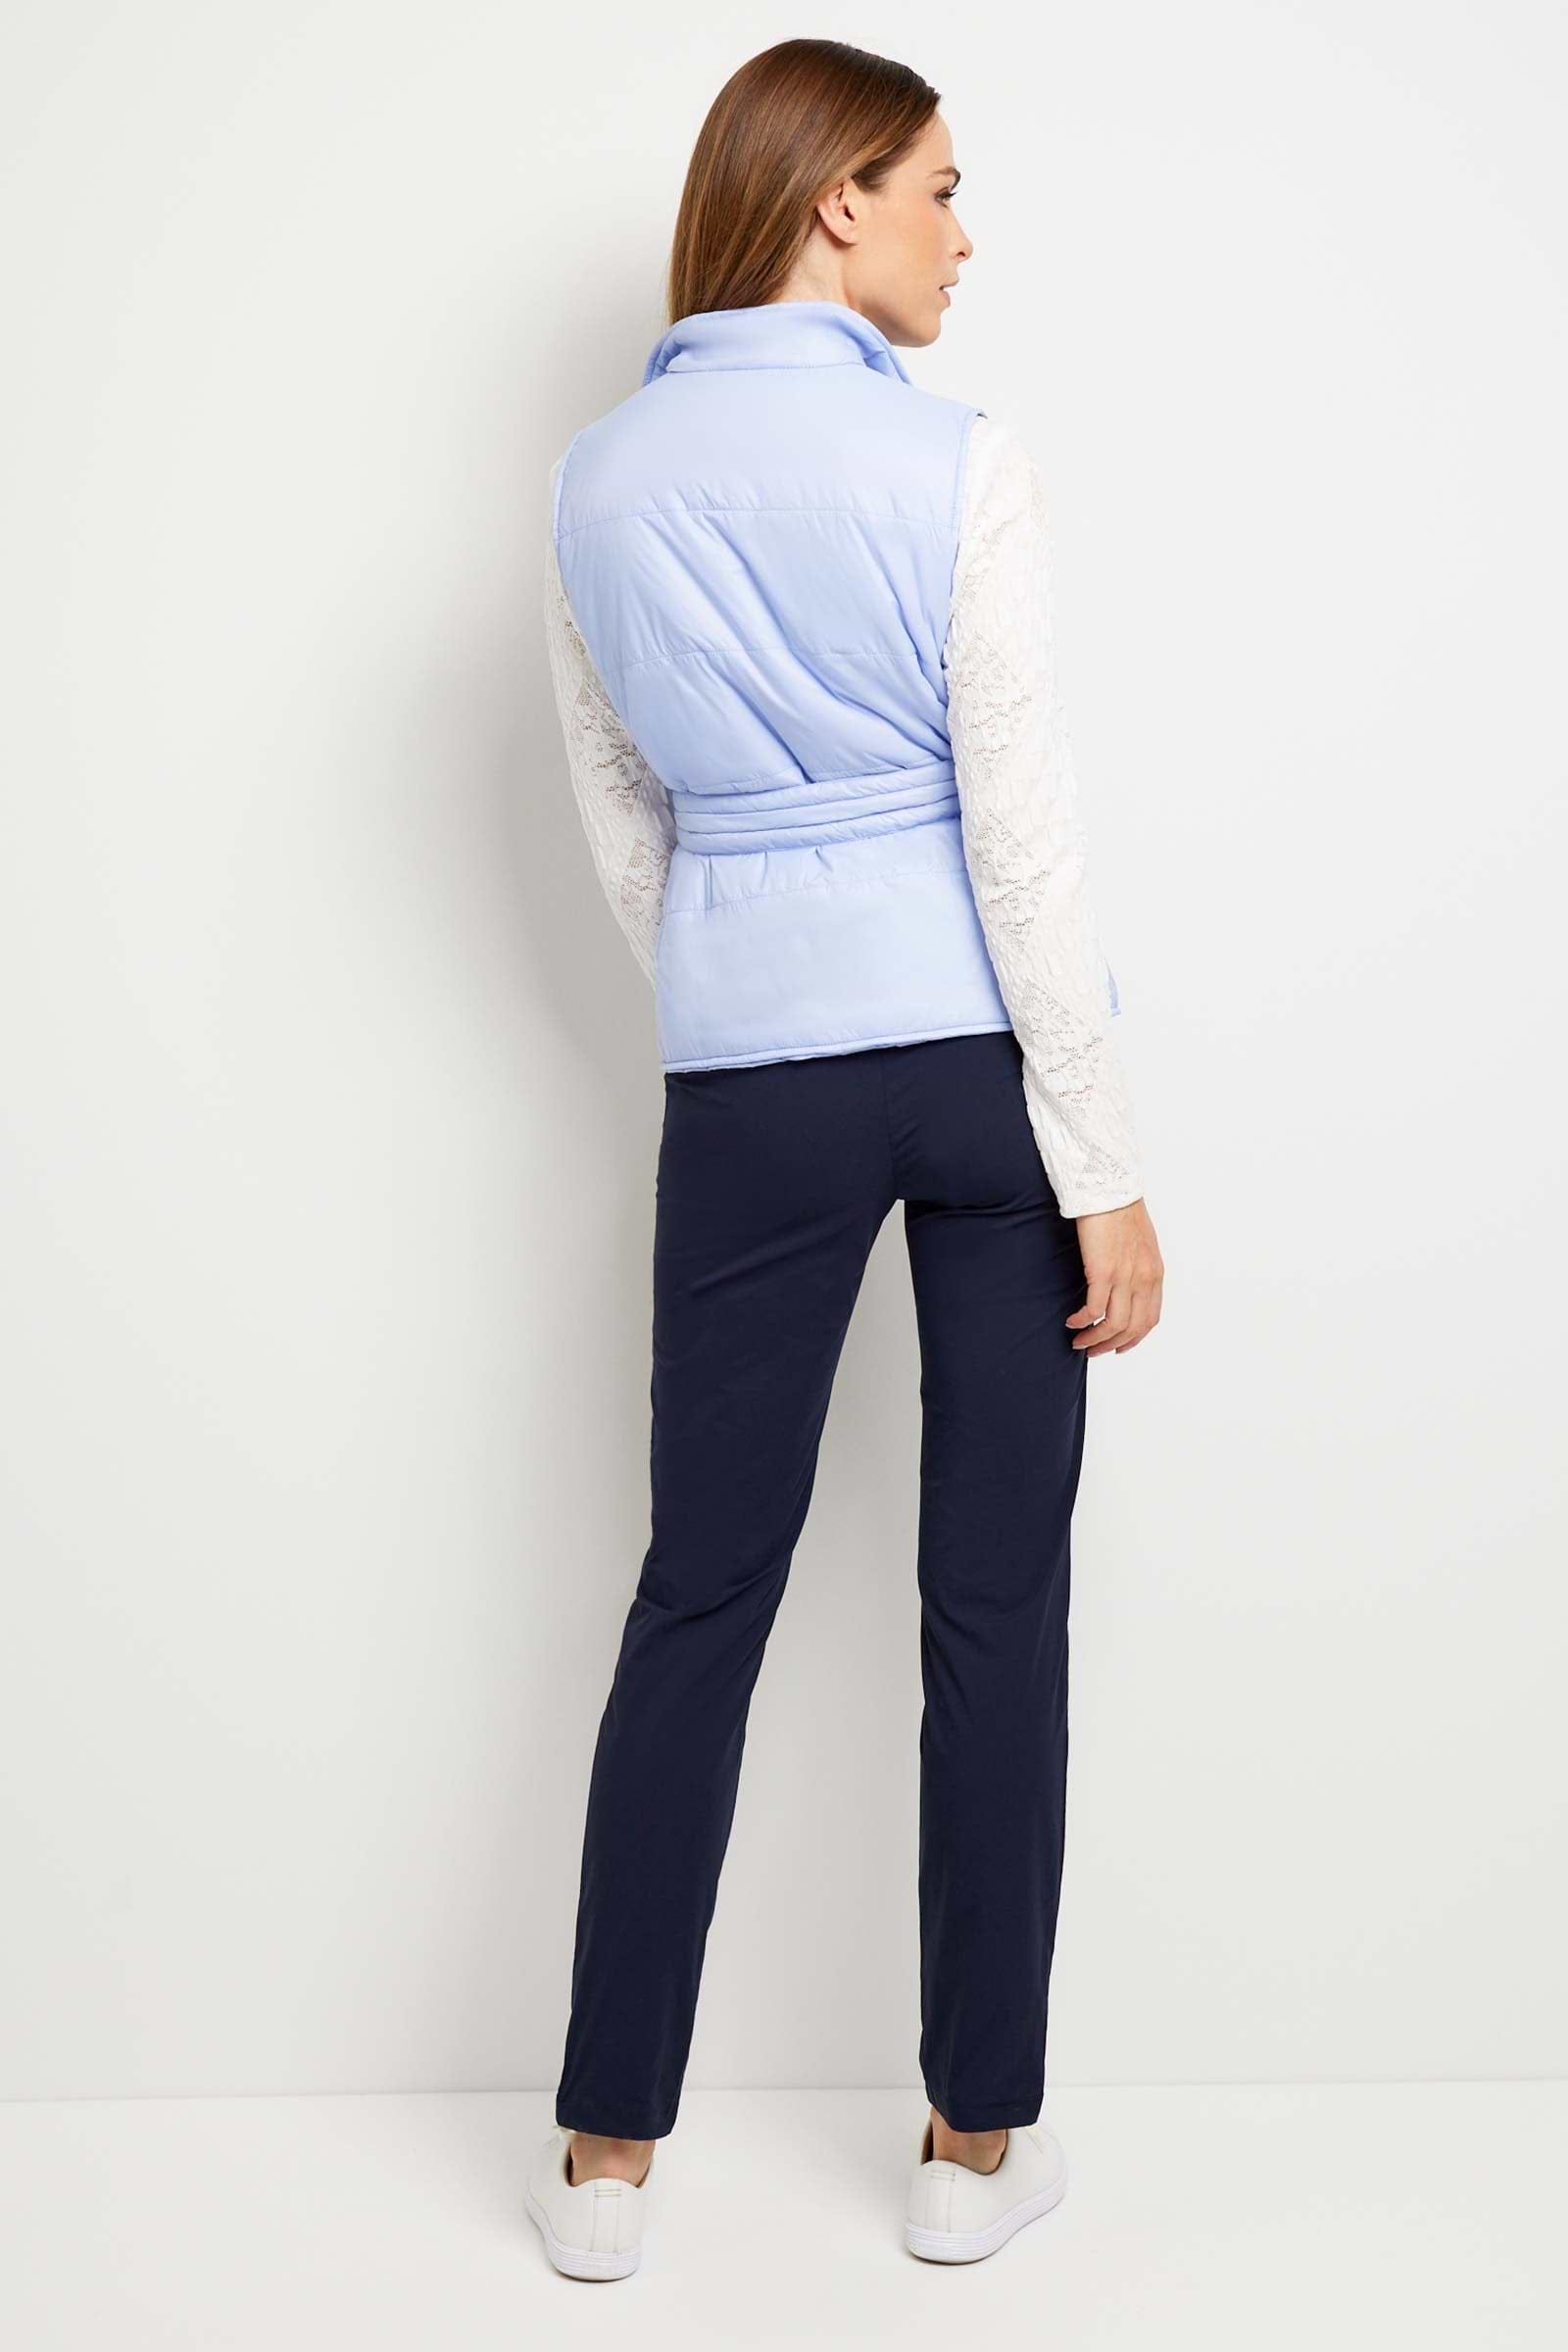 The Best Travel Vest. Woman Showing the Back Profile of an Ainslee Quilted Vest in Periwinkle